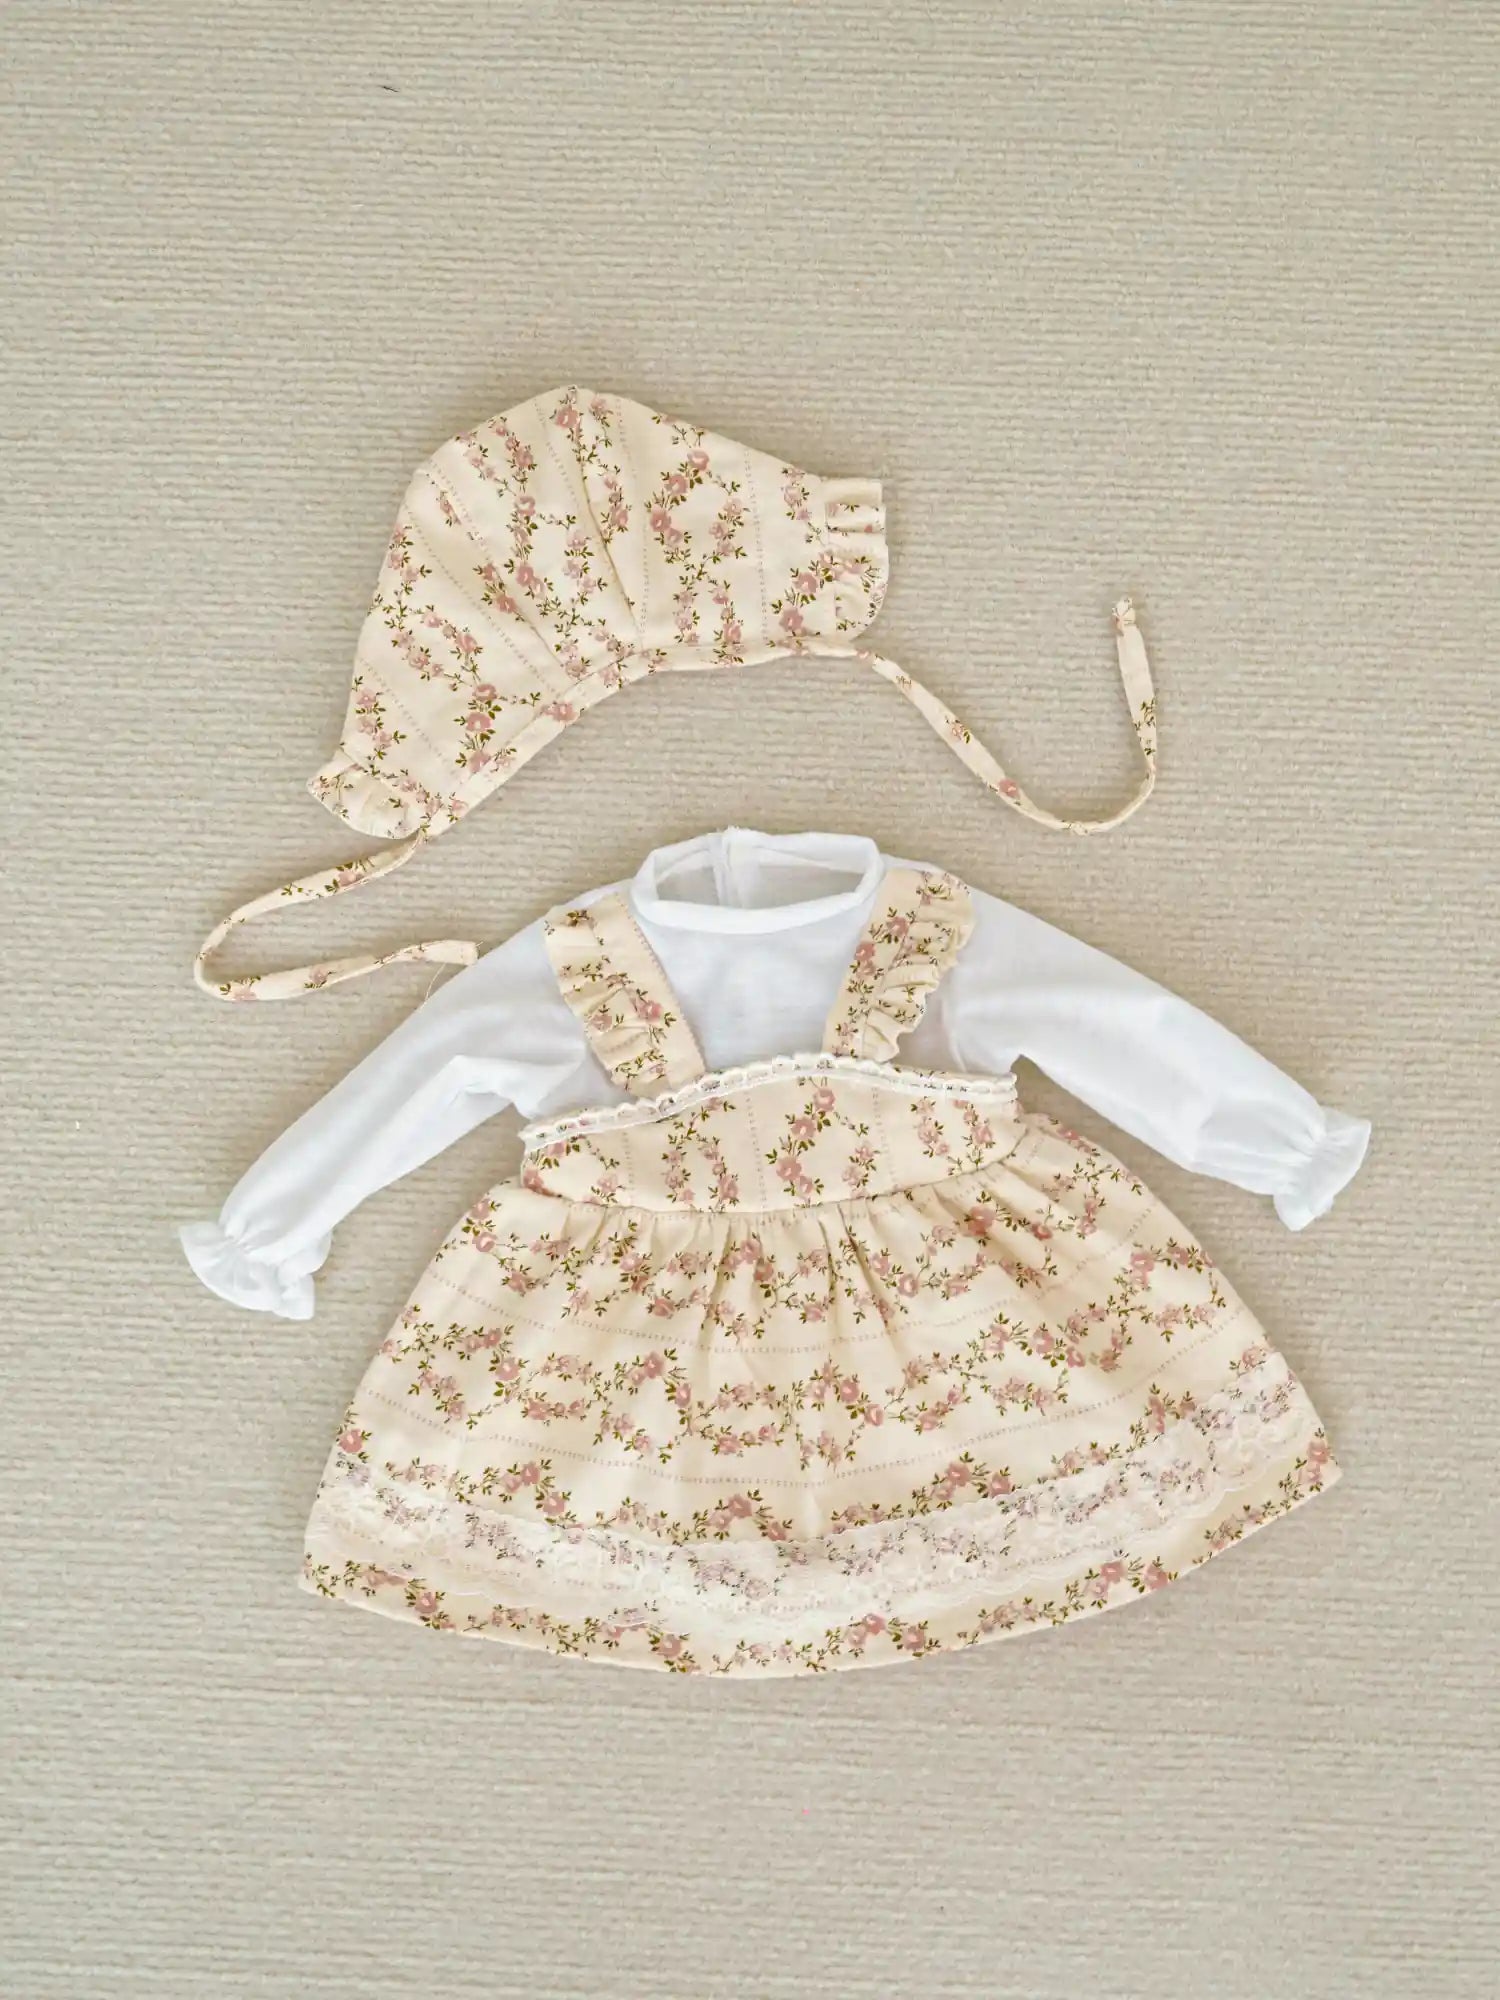 ChimiDoll-17-19 Inch Reborn Doll Outfit Set with Floral Print Dress and Matching Bonnet